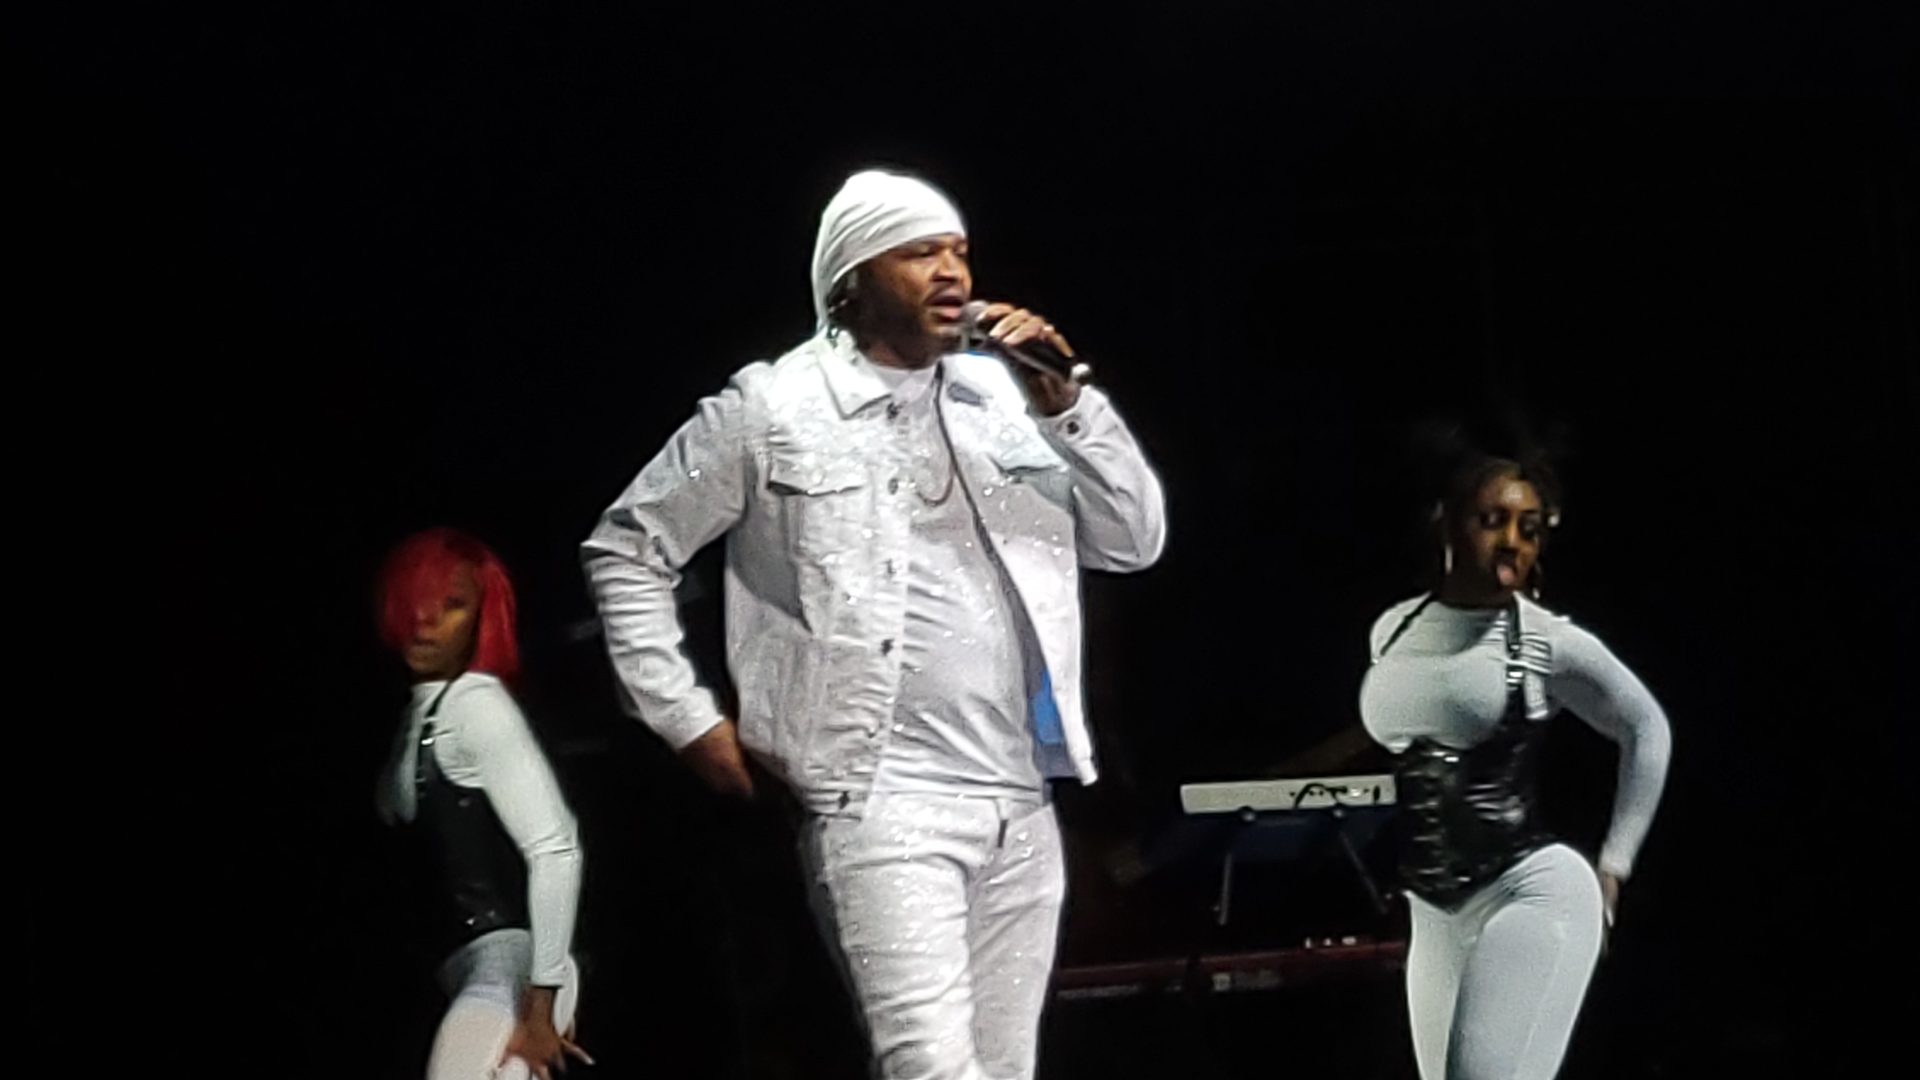   
																Keyshia Cole and Jaheim offer Love Hard tour preview at Prudential Center 
															 